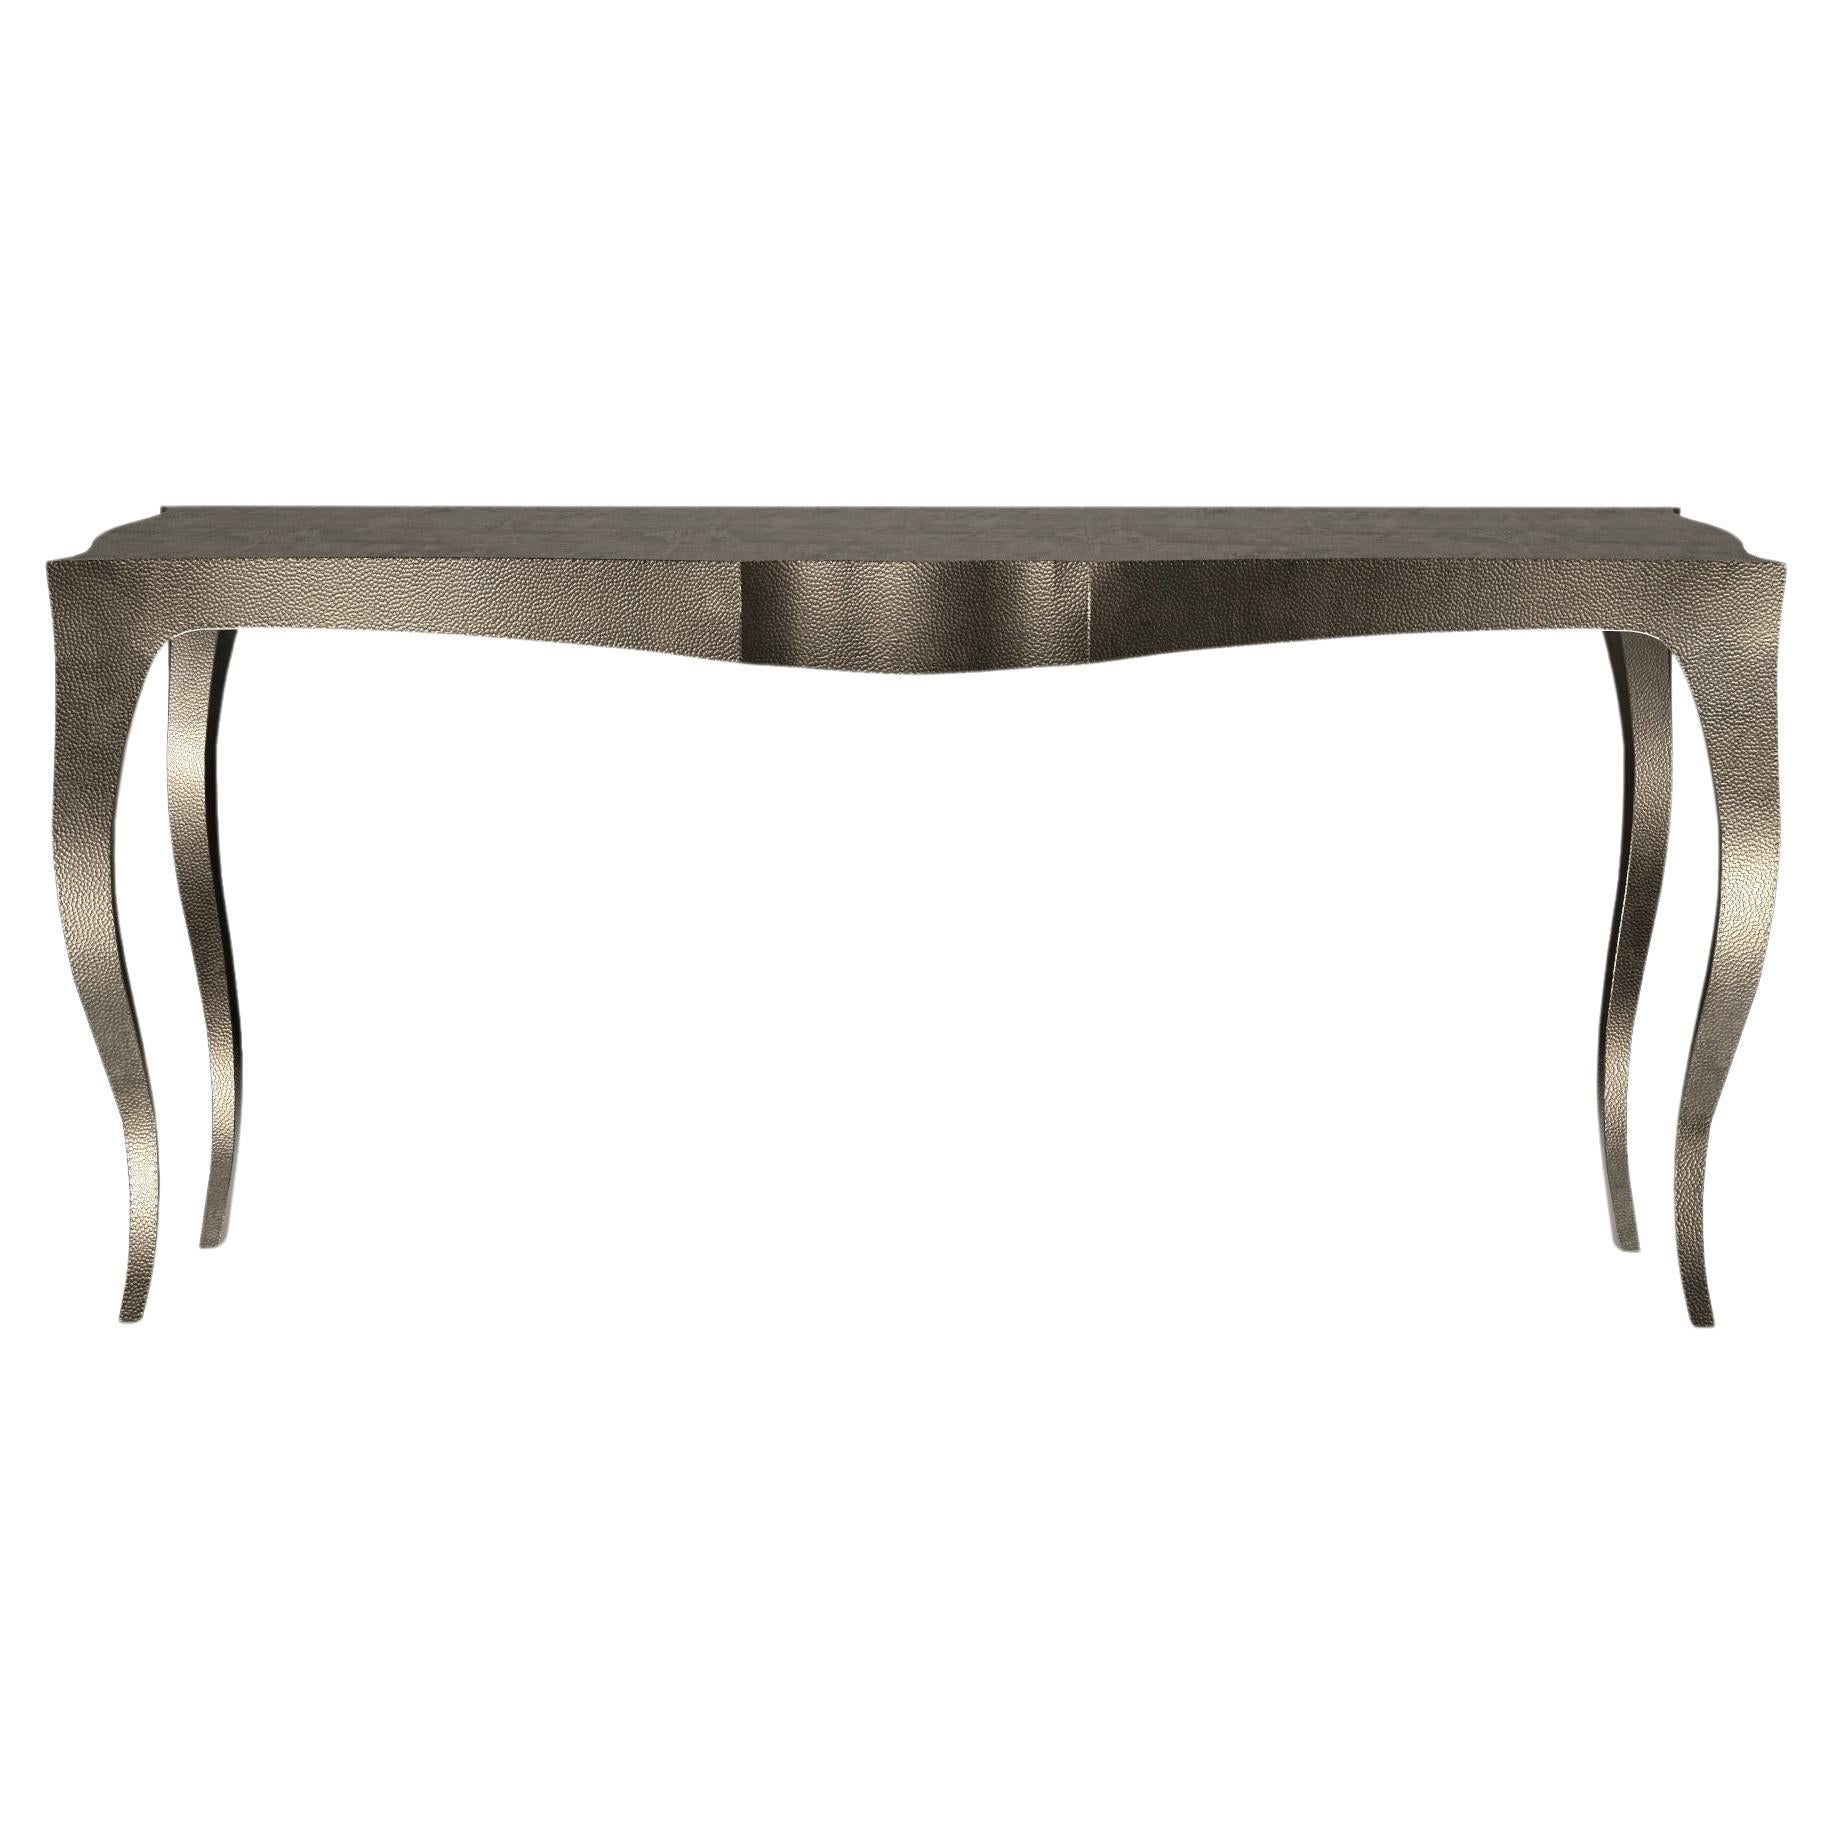 Louise Console Art Deco Desks and Writing Tables Mid. Hammered Antique Bronze For Sale